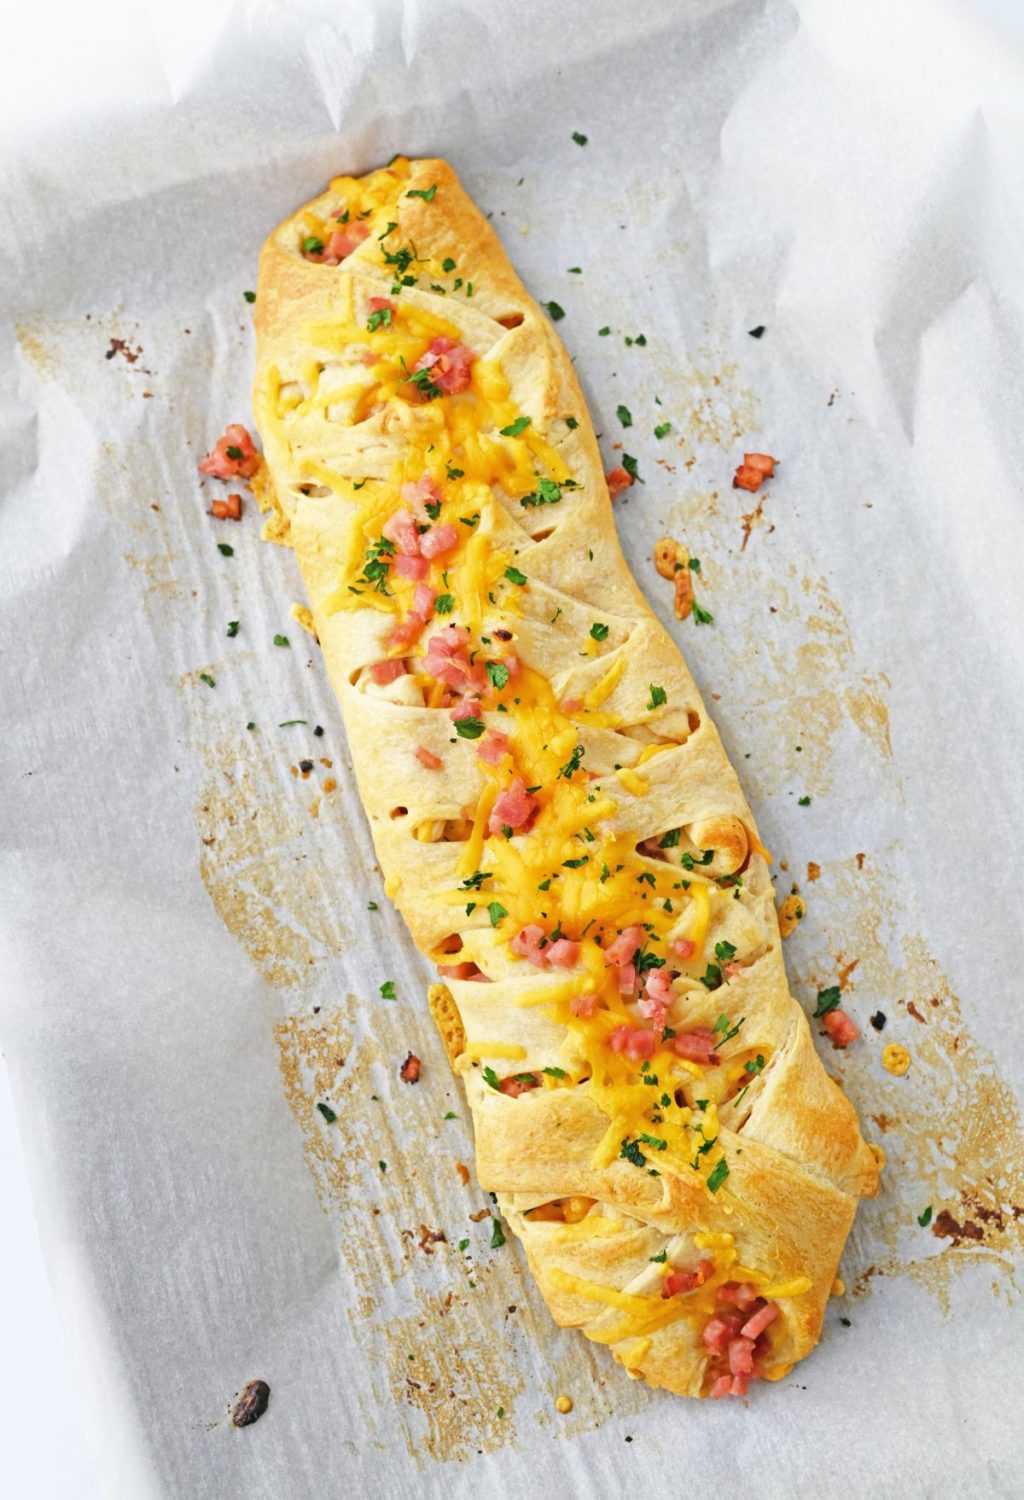 A long bread with cheese and meat on it.